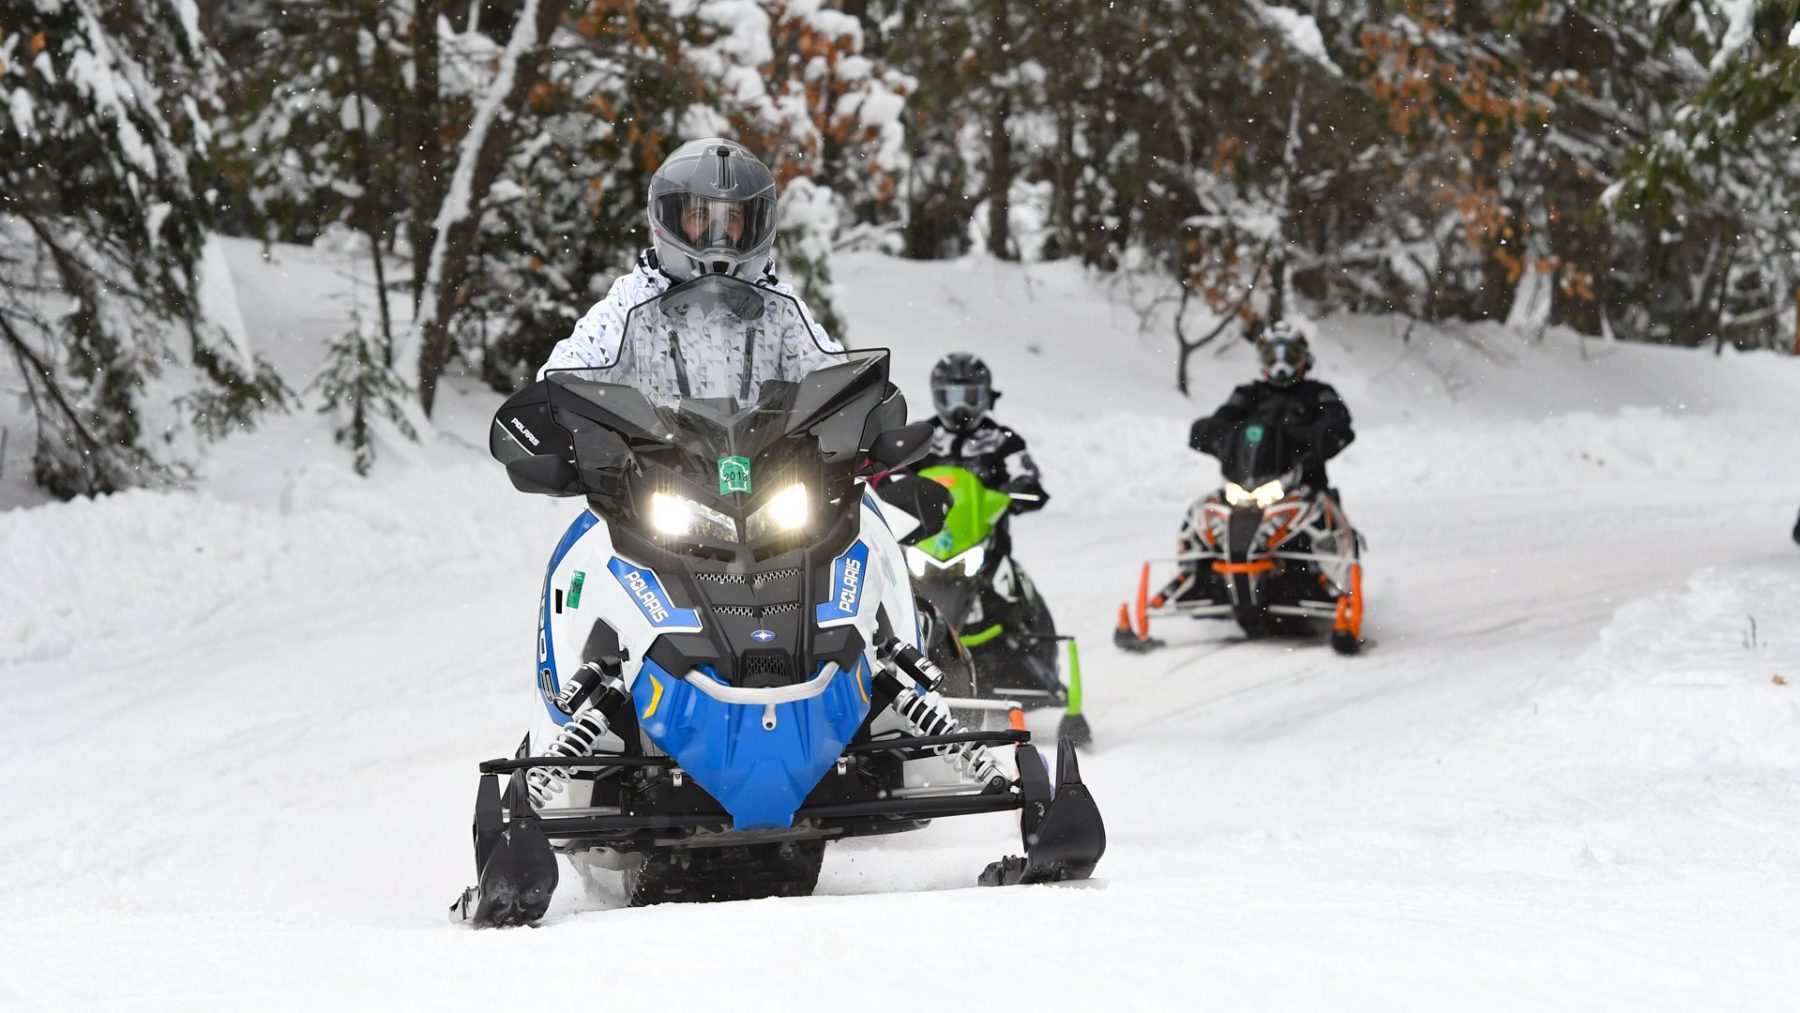 Article: Visit these snowmobiling hot spots this winter